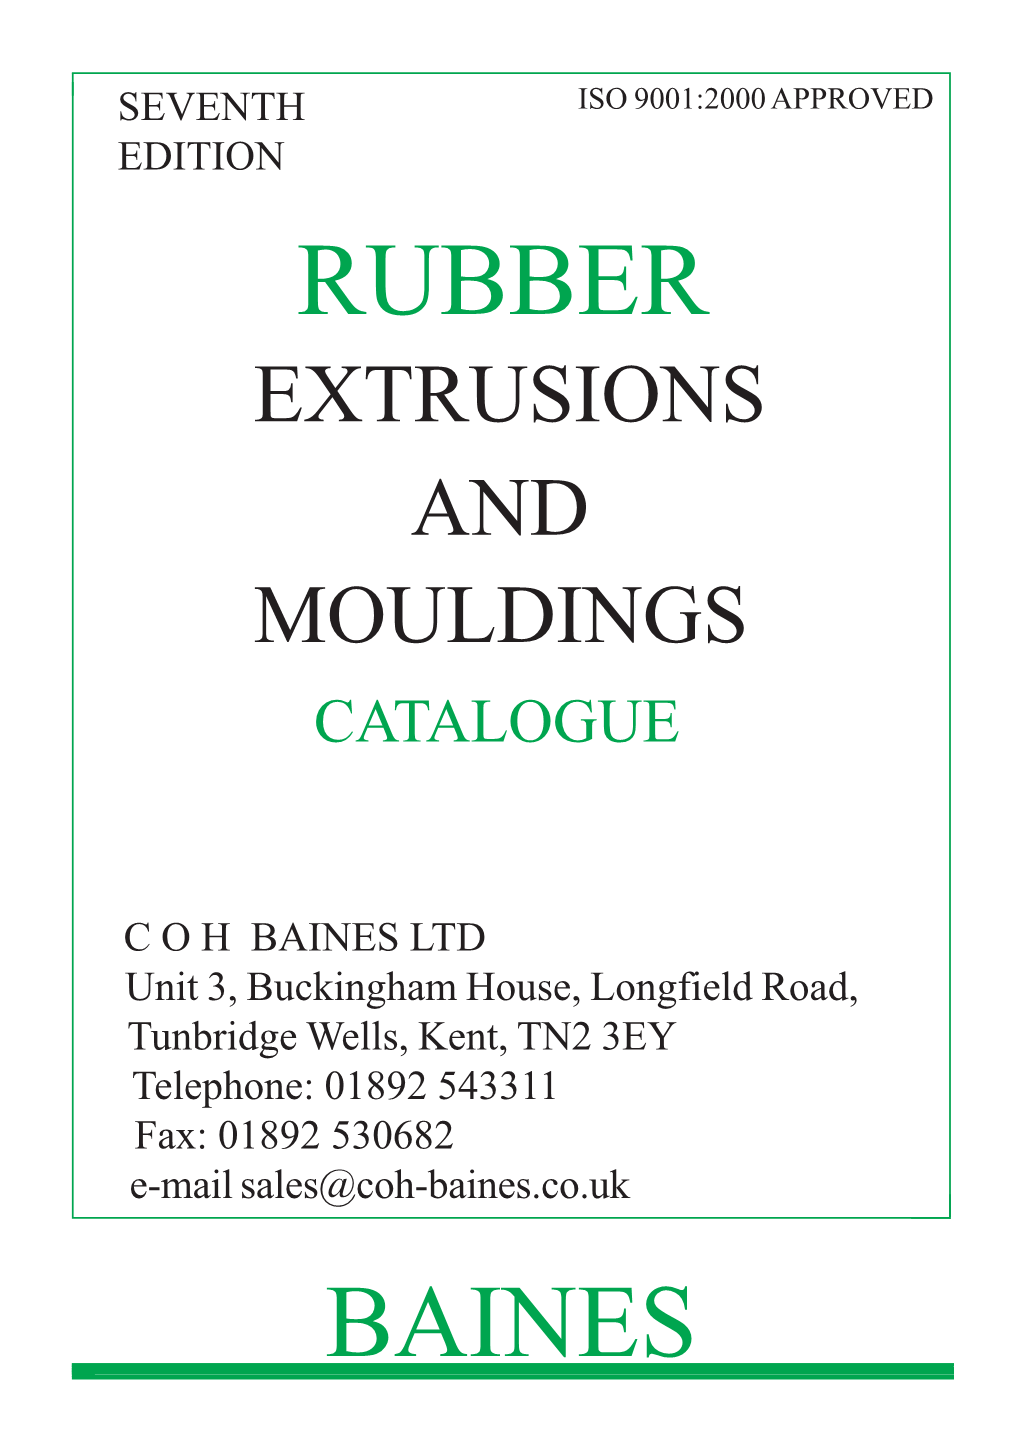 Rubber Extrusions and Mouldings Catalogue